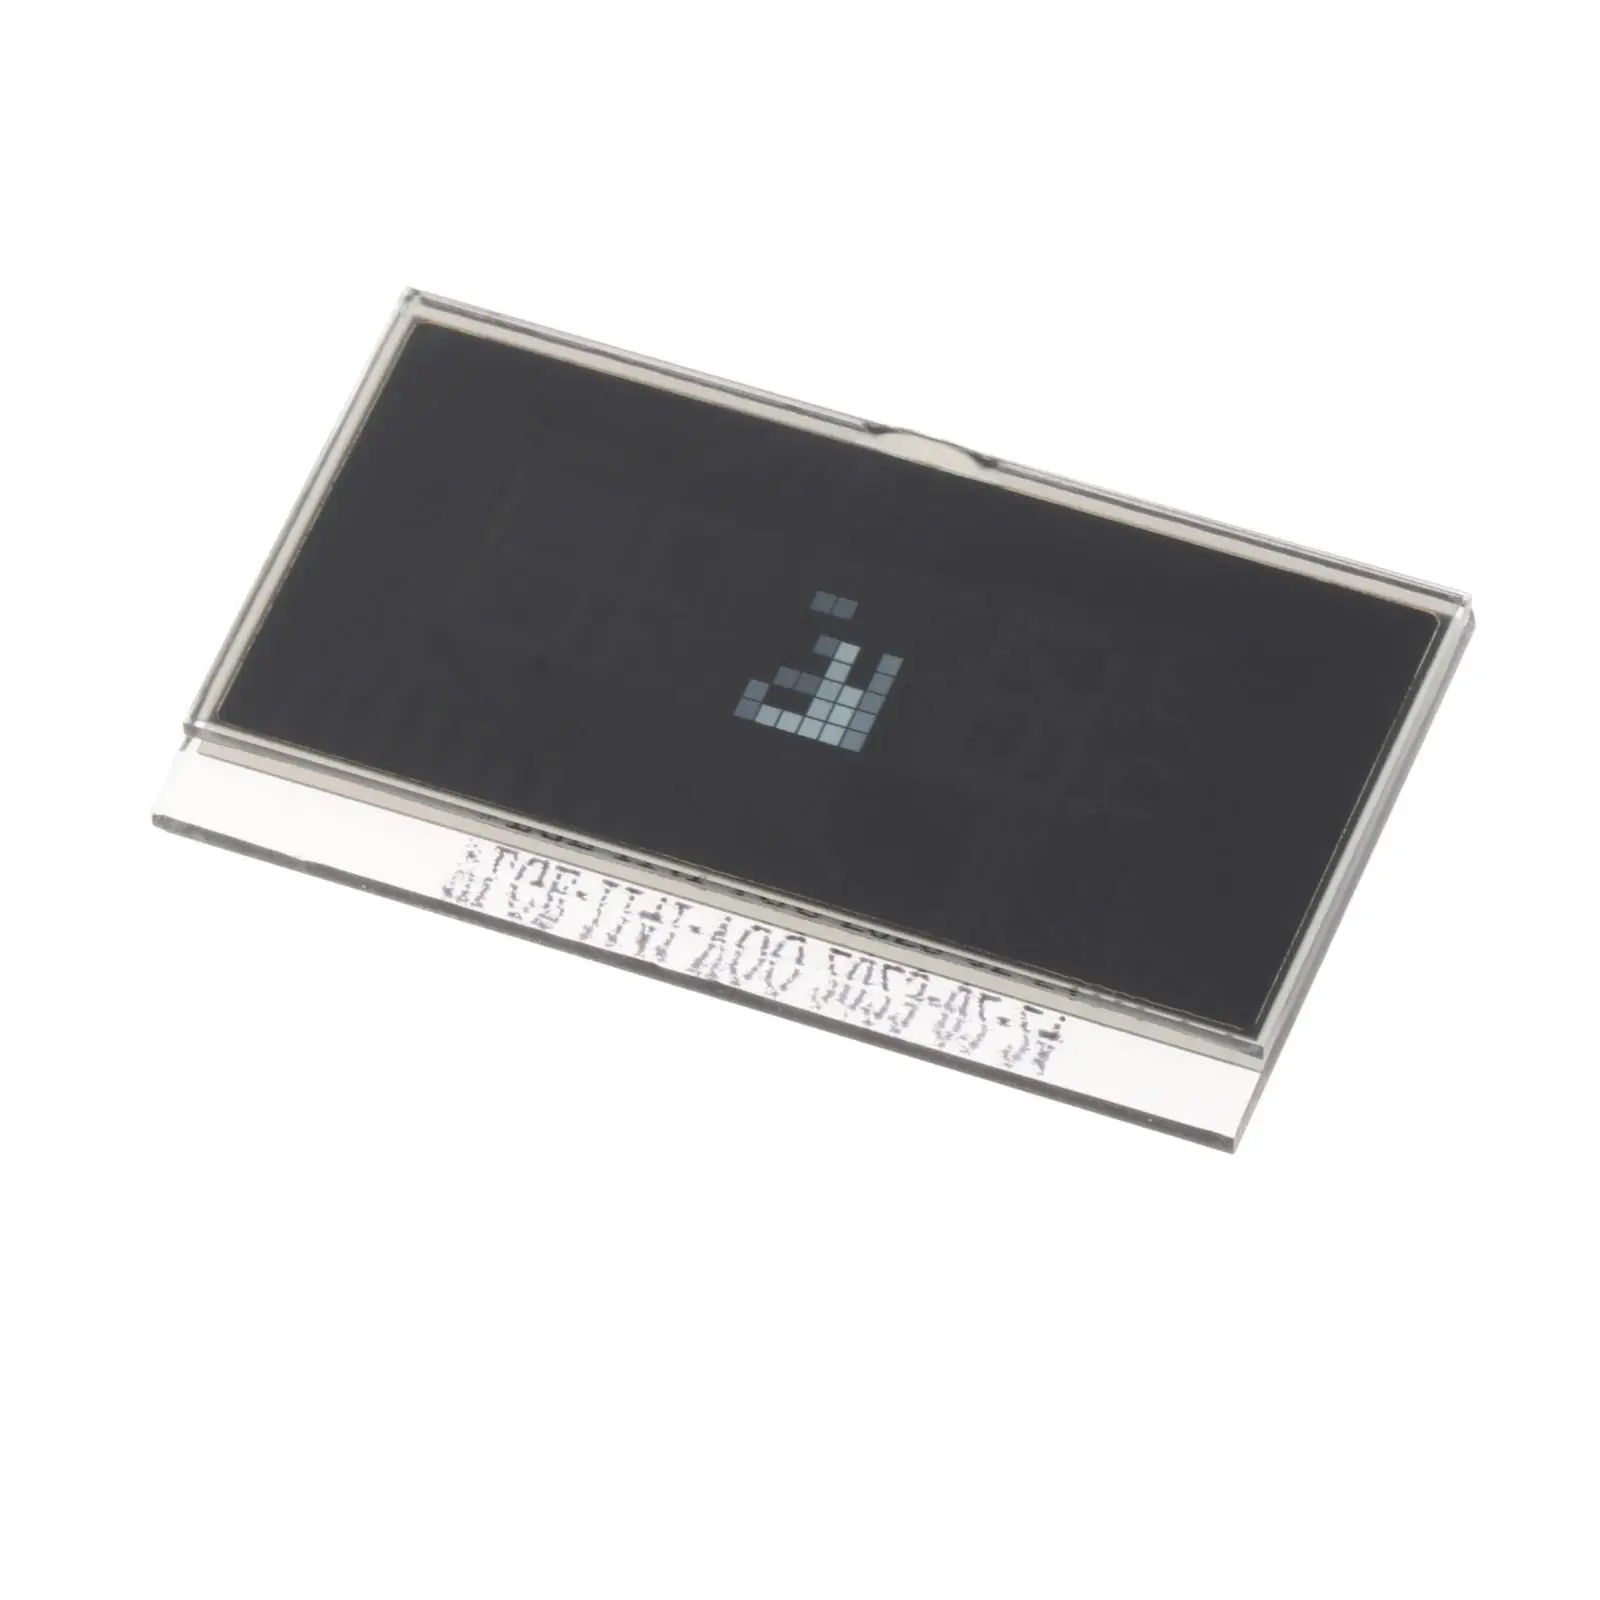 LCD Screen Air Conditioning Pixel Repair Professional Durable Replace for A6 4F Q7 4L Accessory